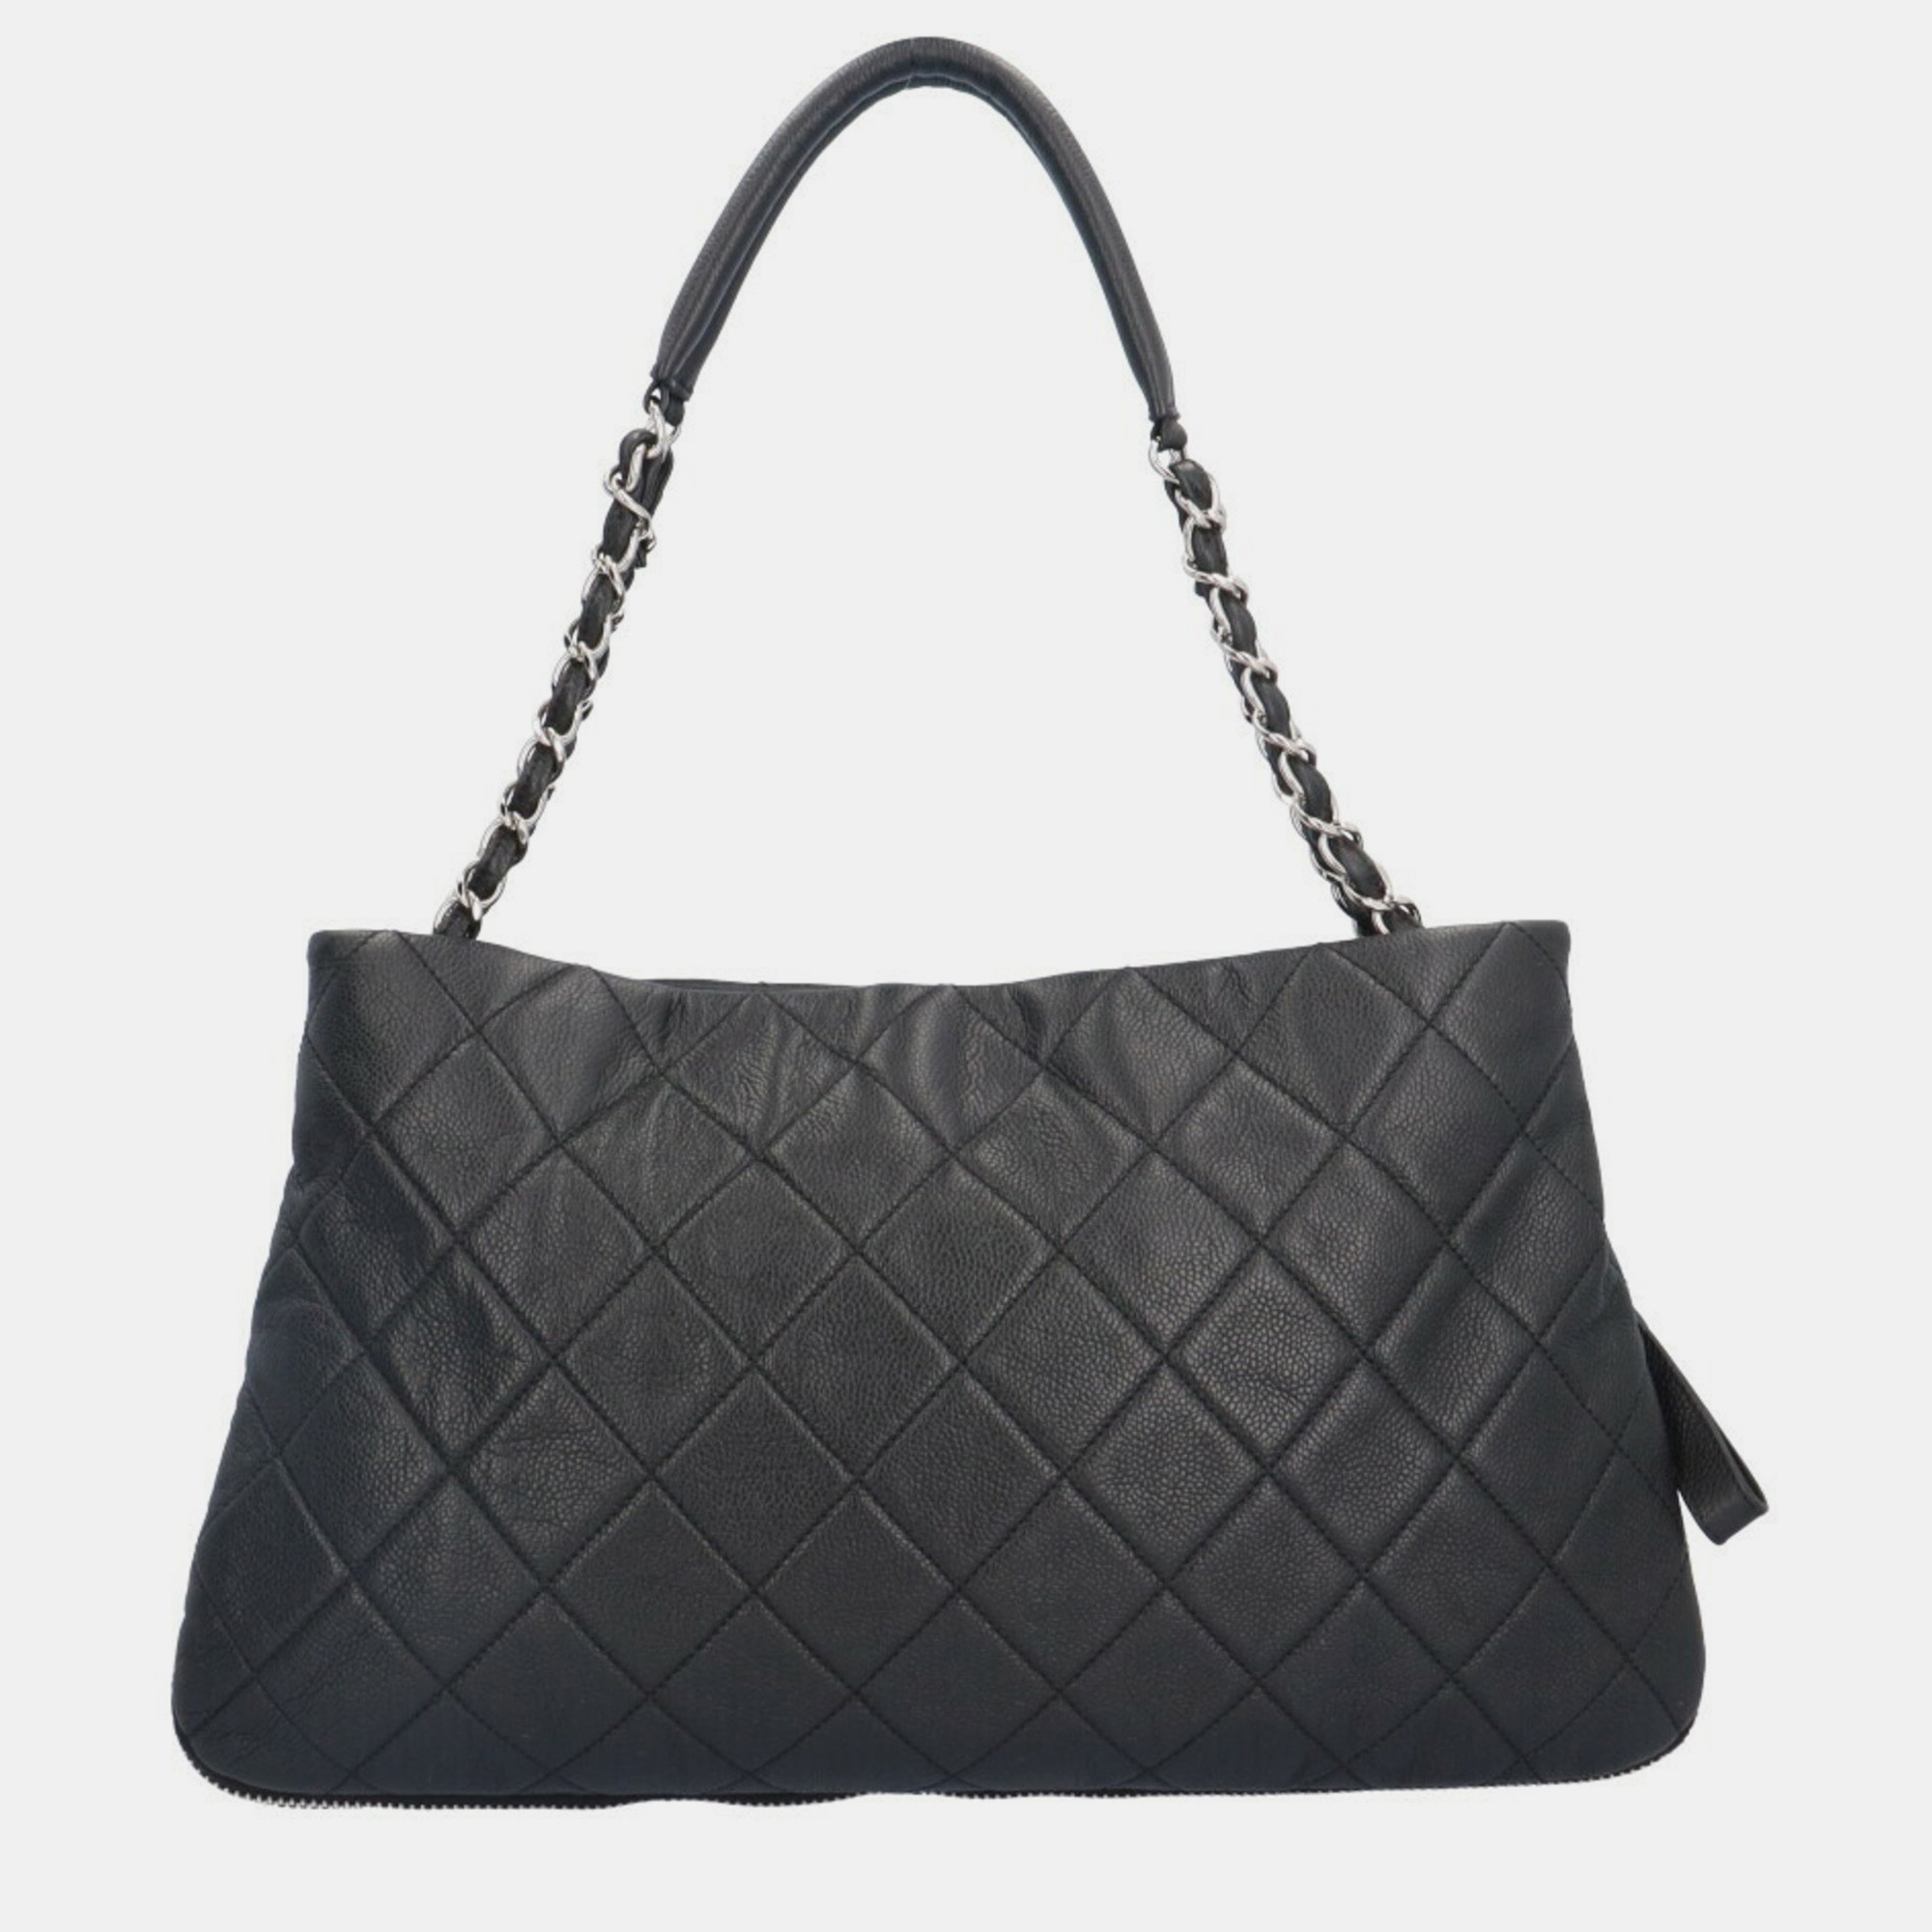 

Chanel Black Caviar Leather CC Quilted Shoulder Bag